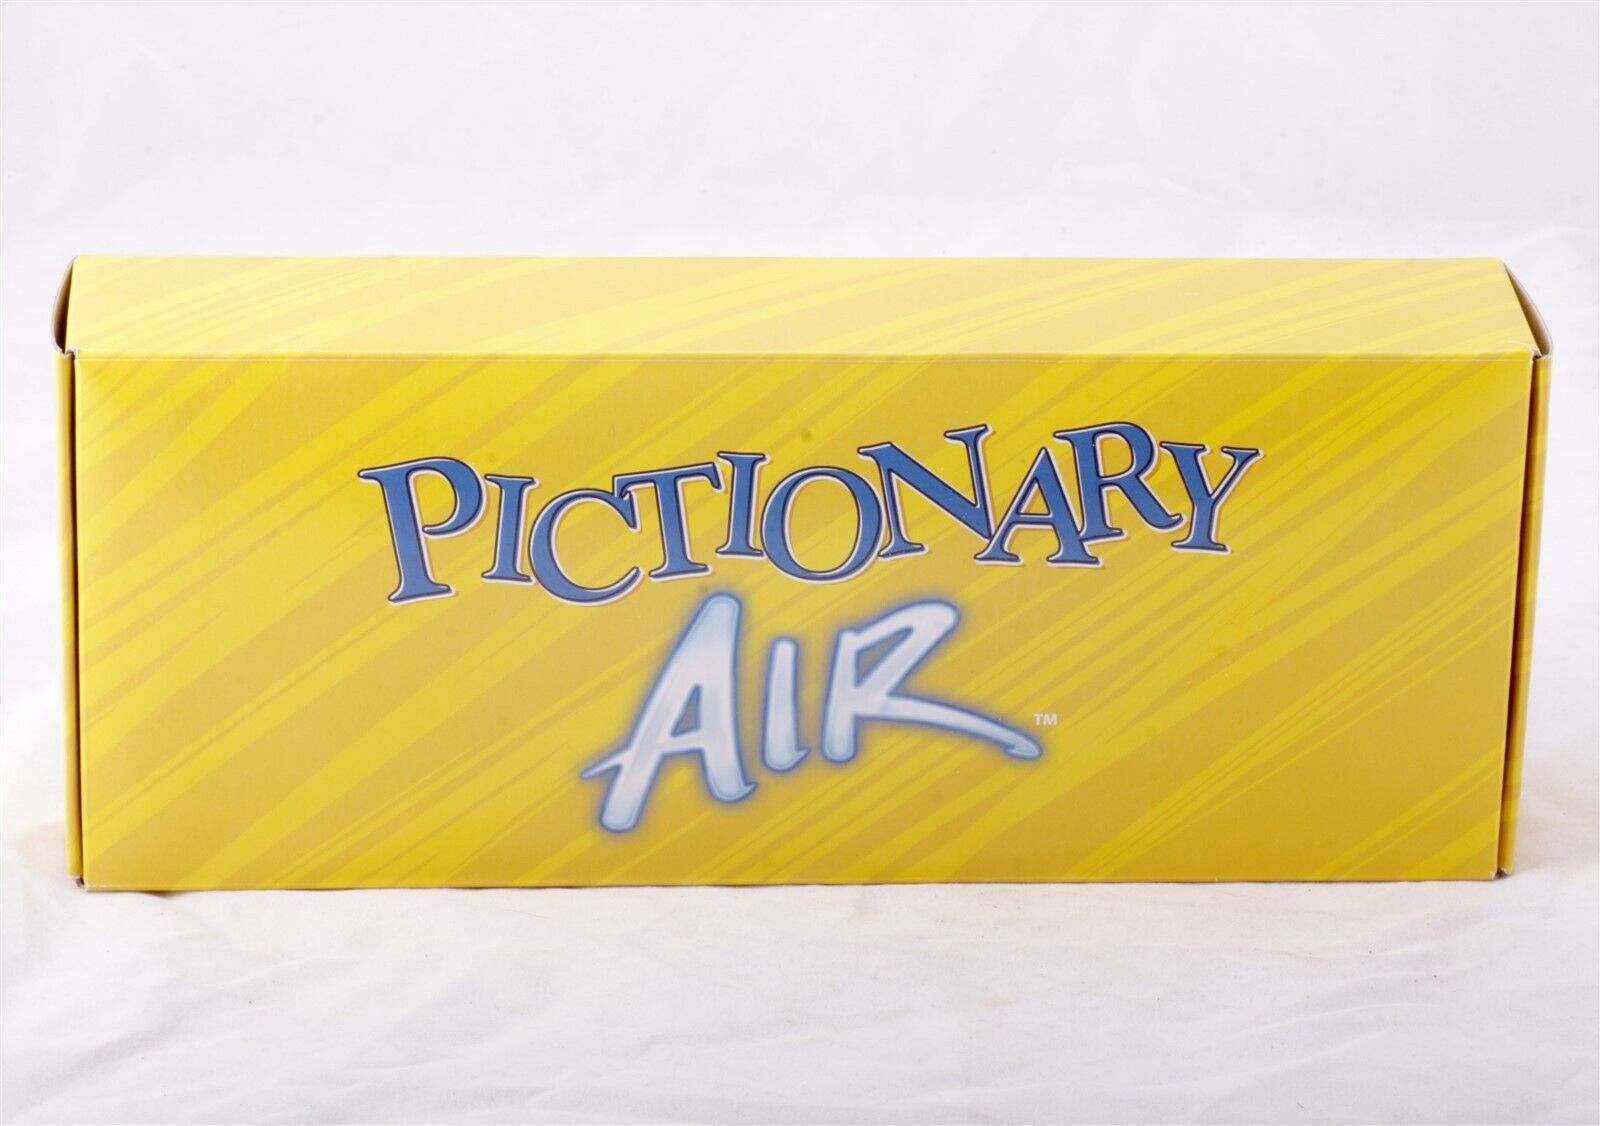 NEW Sealed Pictionary Air Game Draw In Air See On Screen Links To Smart  Devices!